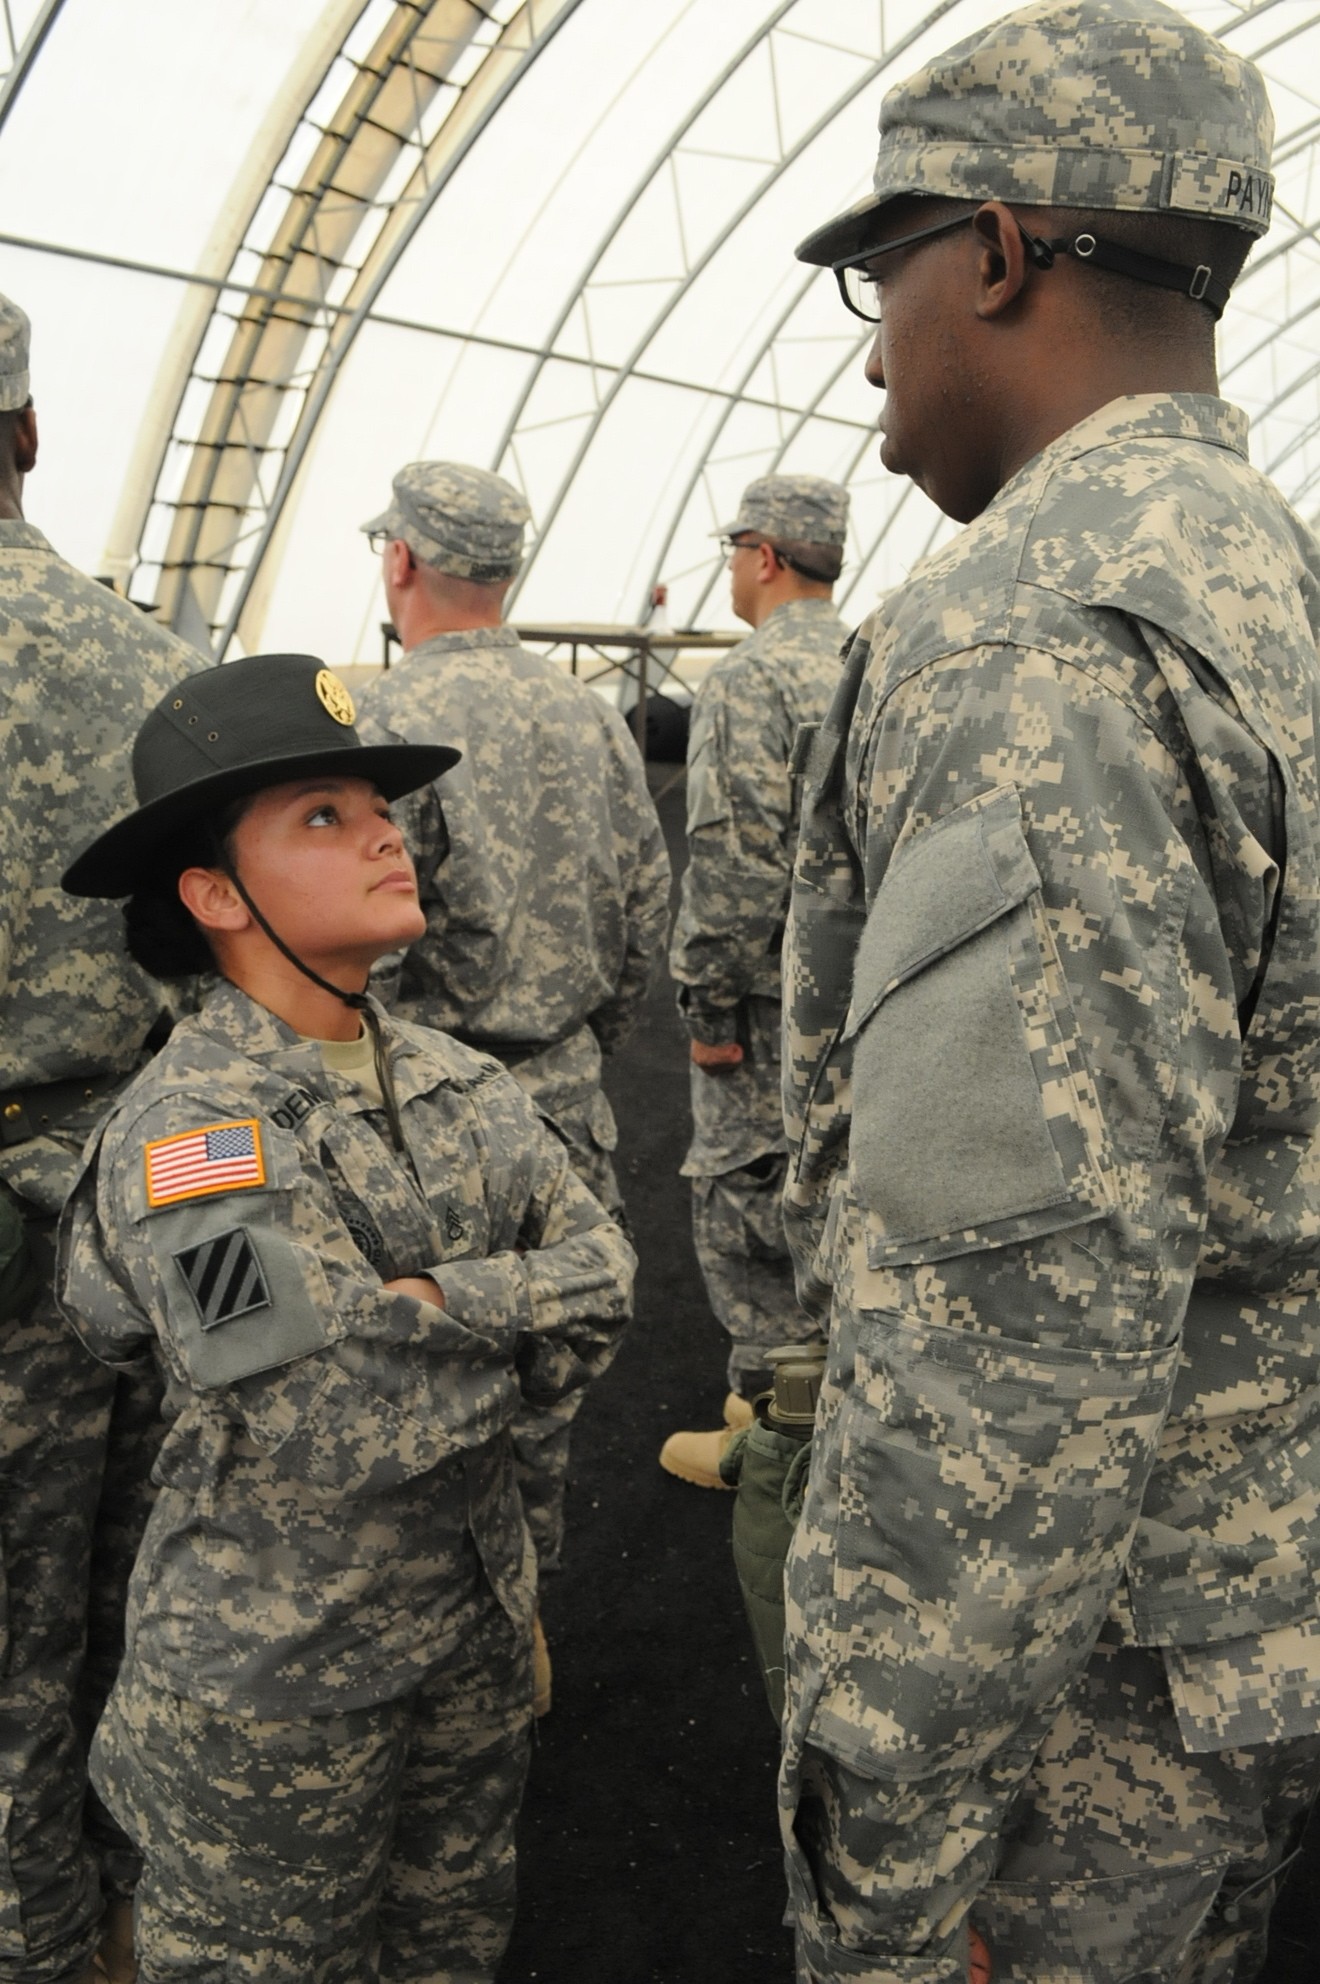 This We'll Defend Path to drill sergeant offers challenges